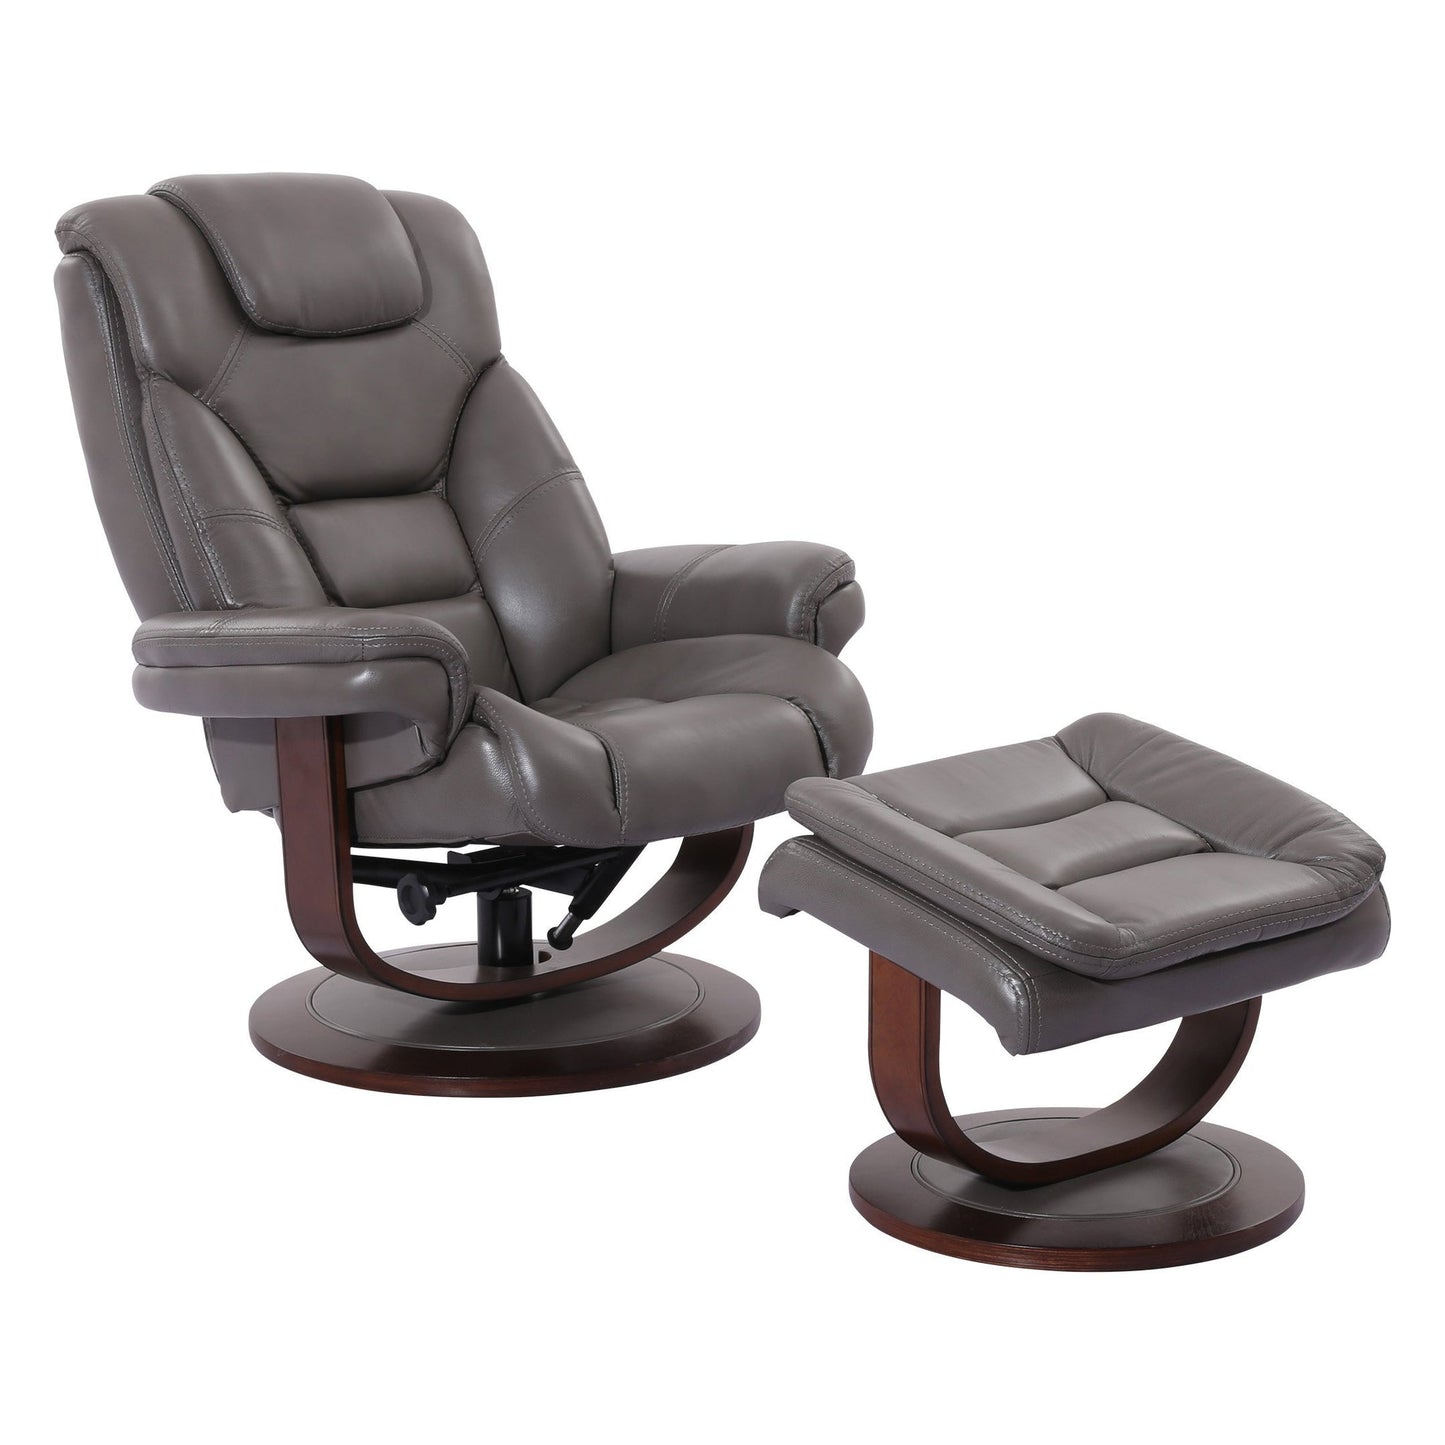 MONARCH - ICE MANUAL RECLINING SWIVEL CHAIR AND OTTOMAN